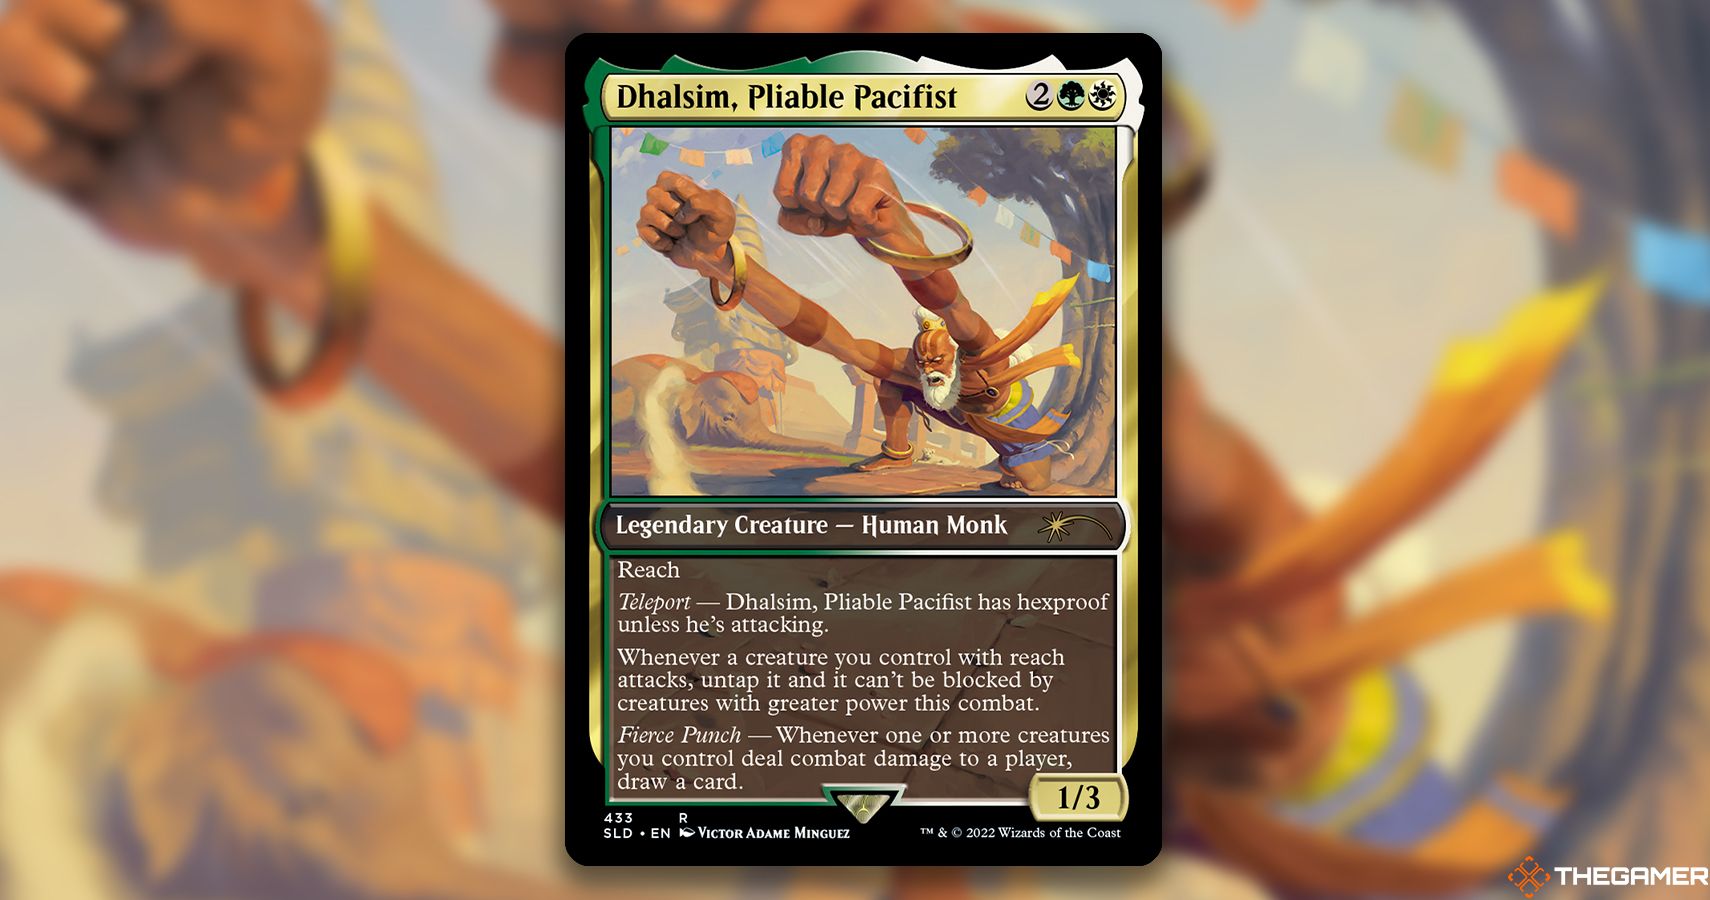 Image of the Dhalsim, Pliable Pacifist card in Magic: The Gathering, with art by Victor Adame Minguez